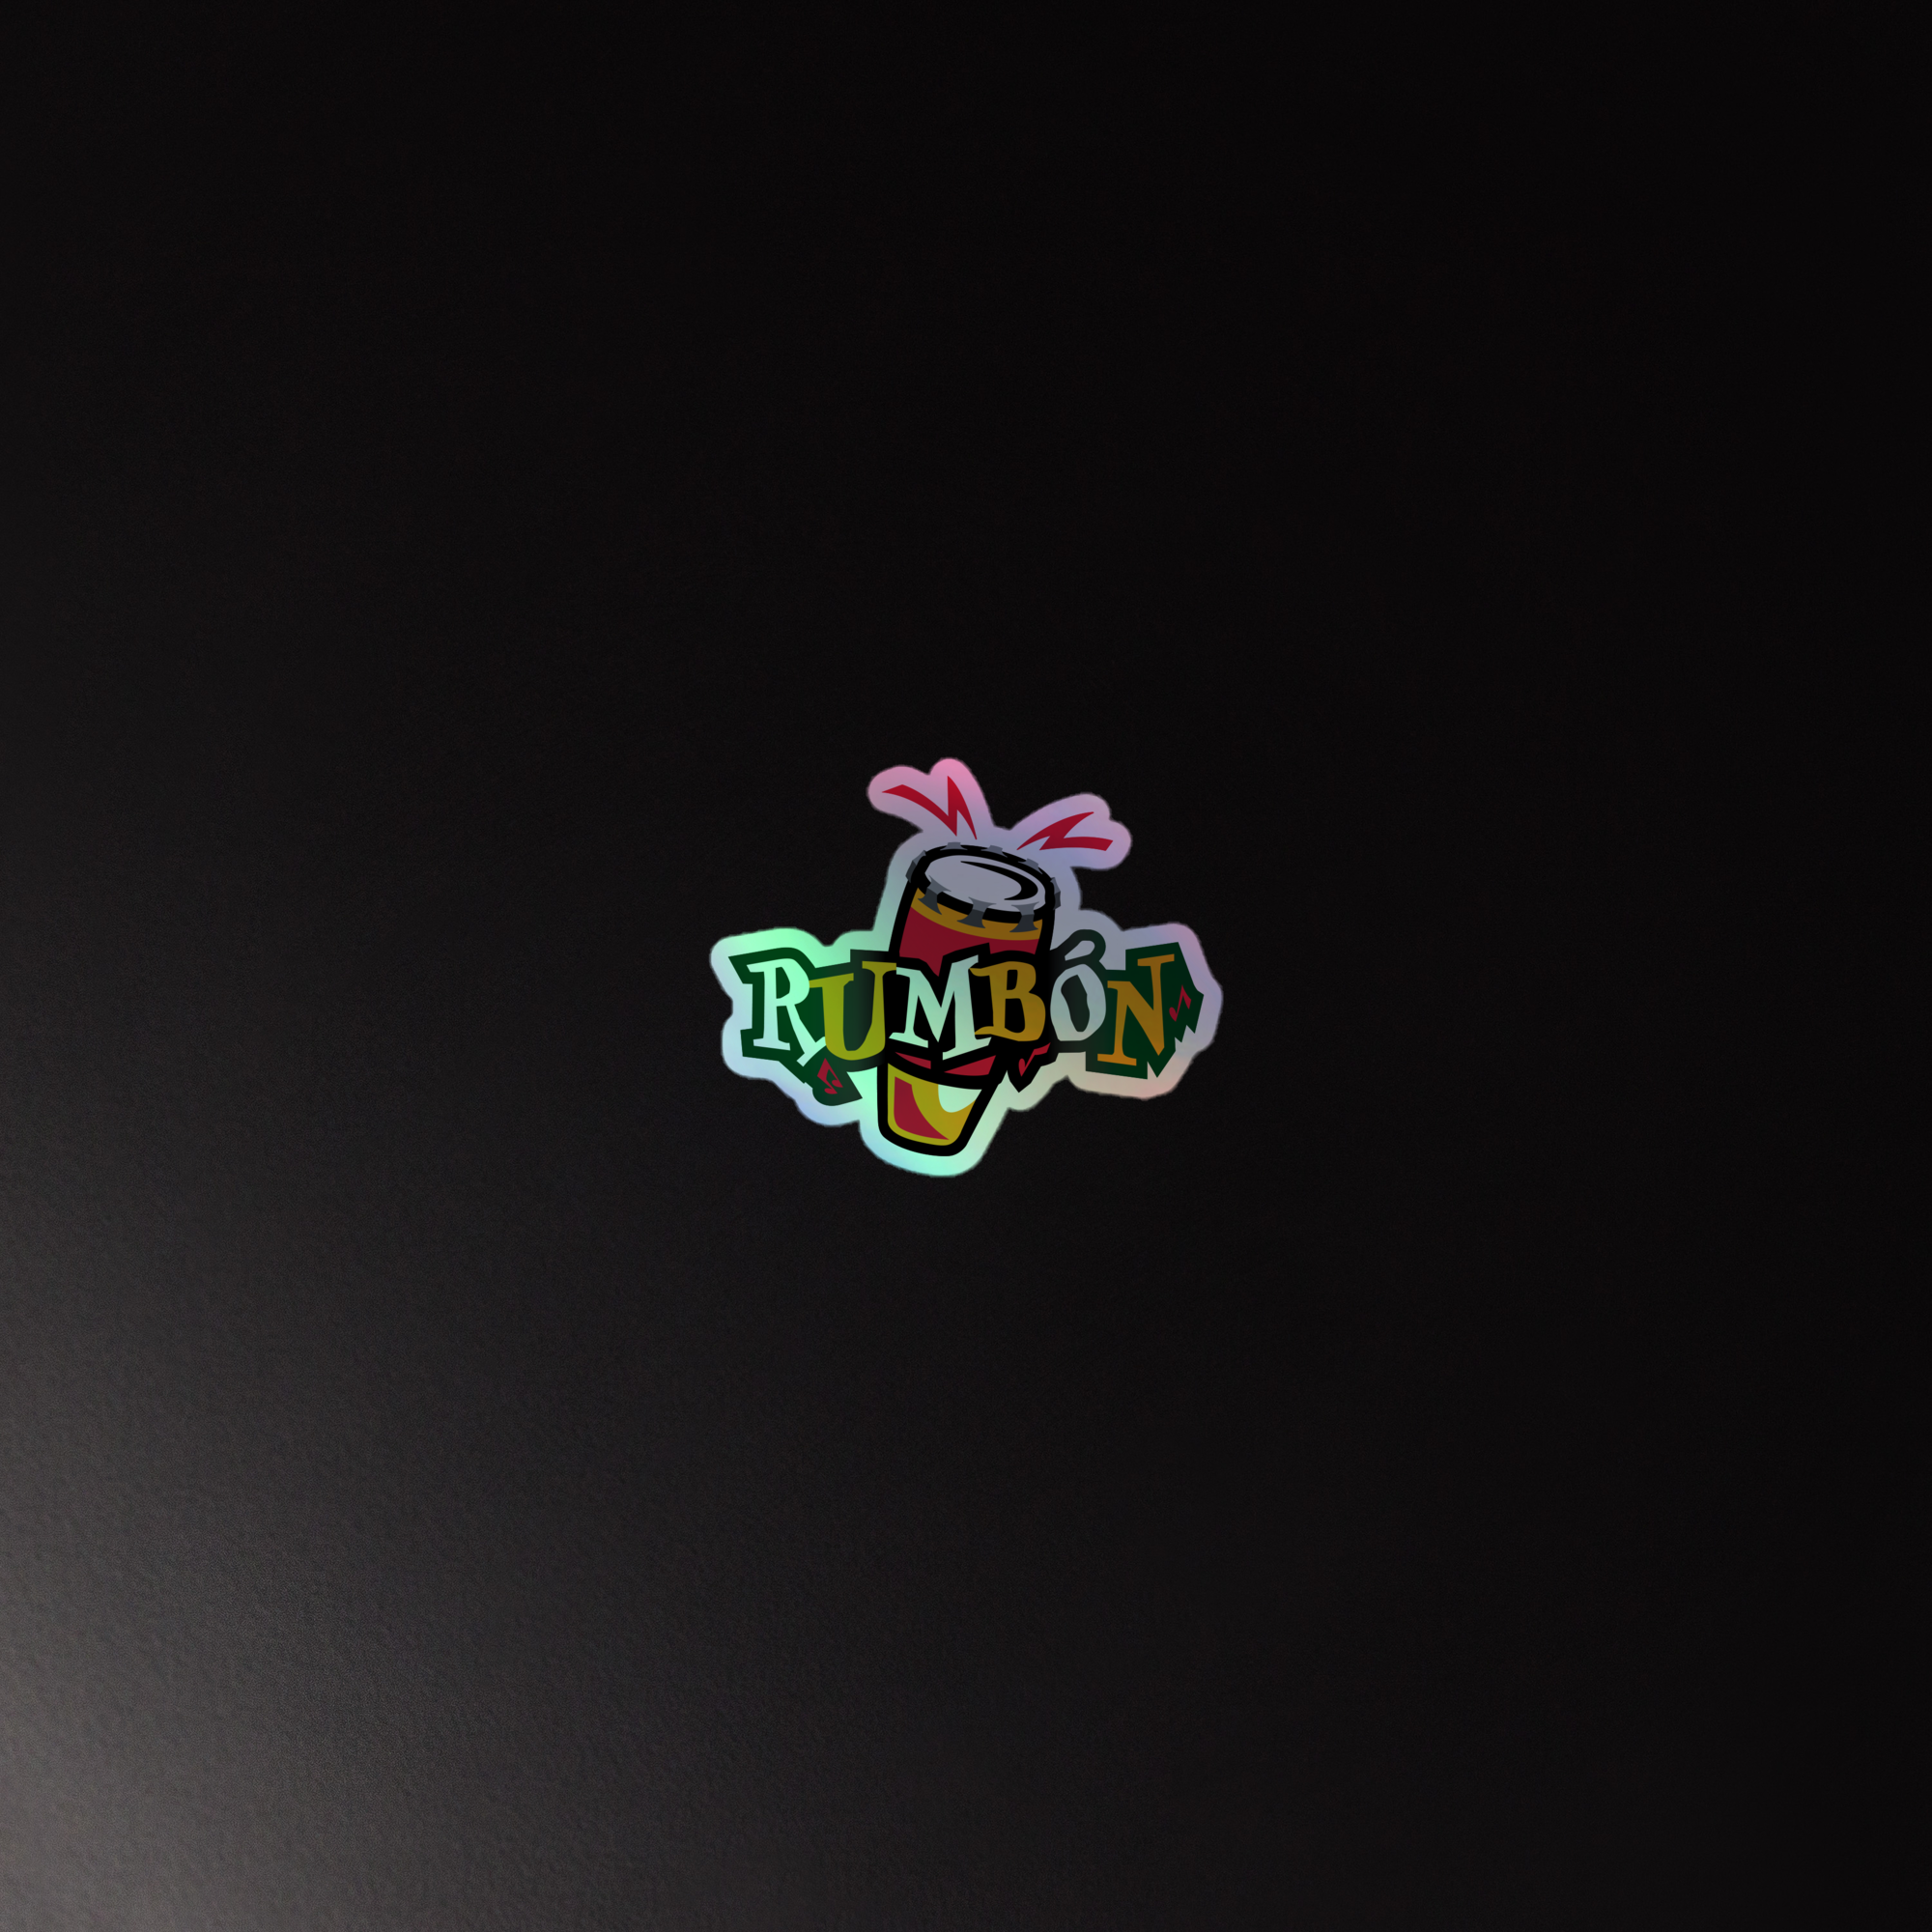 Rumbón: Holographic Sticker